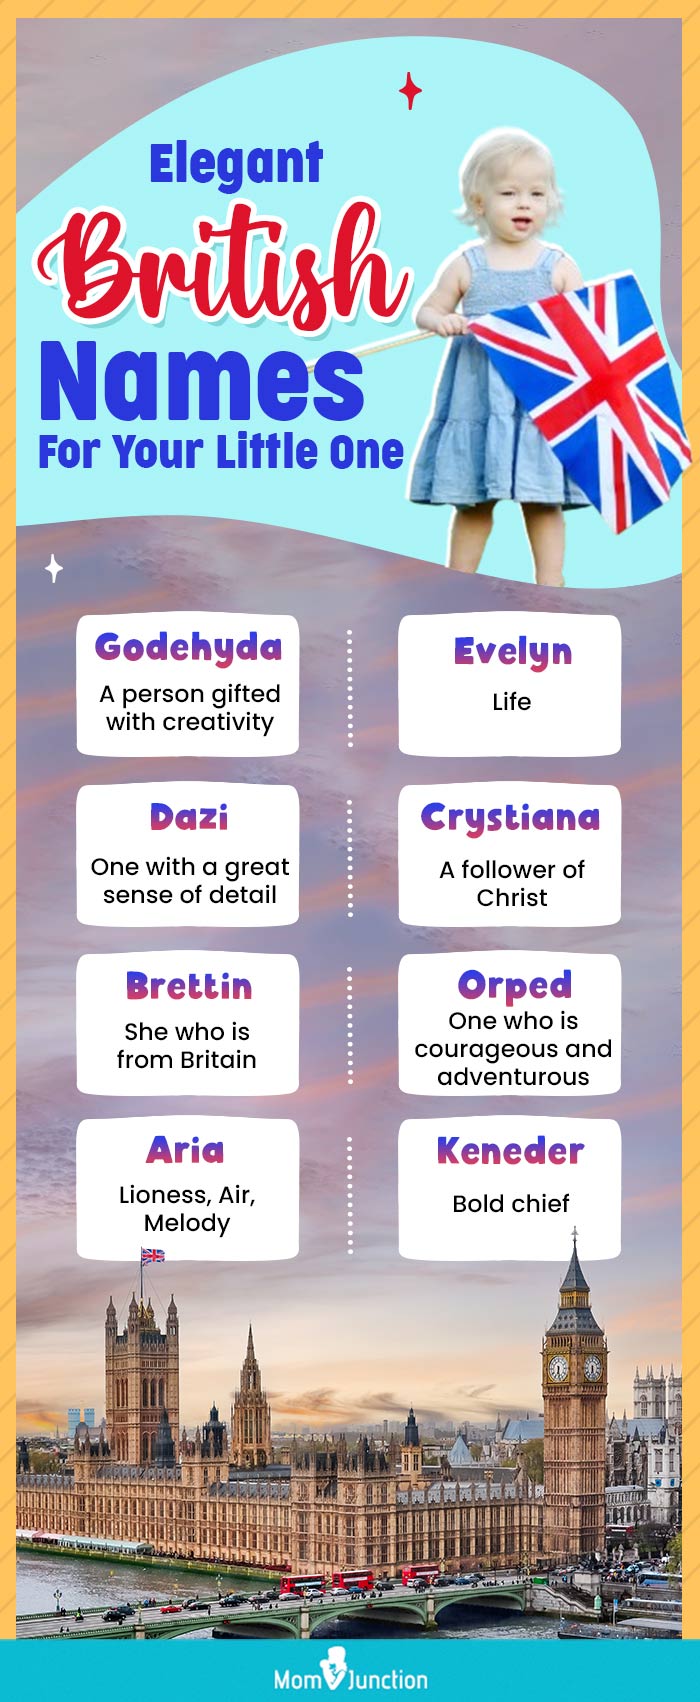 Elegant British Names For Your Little One (infographic)